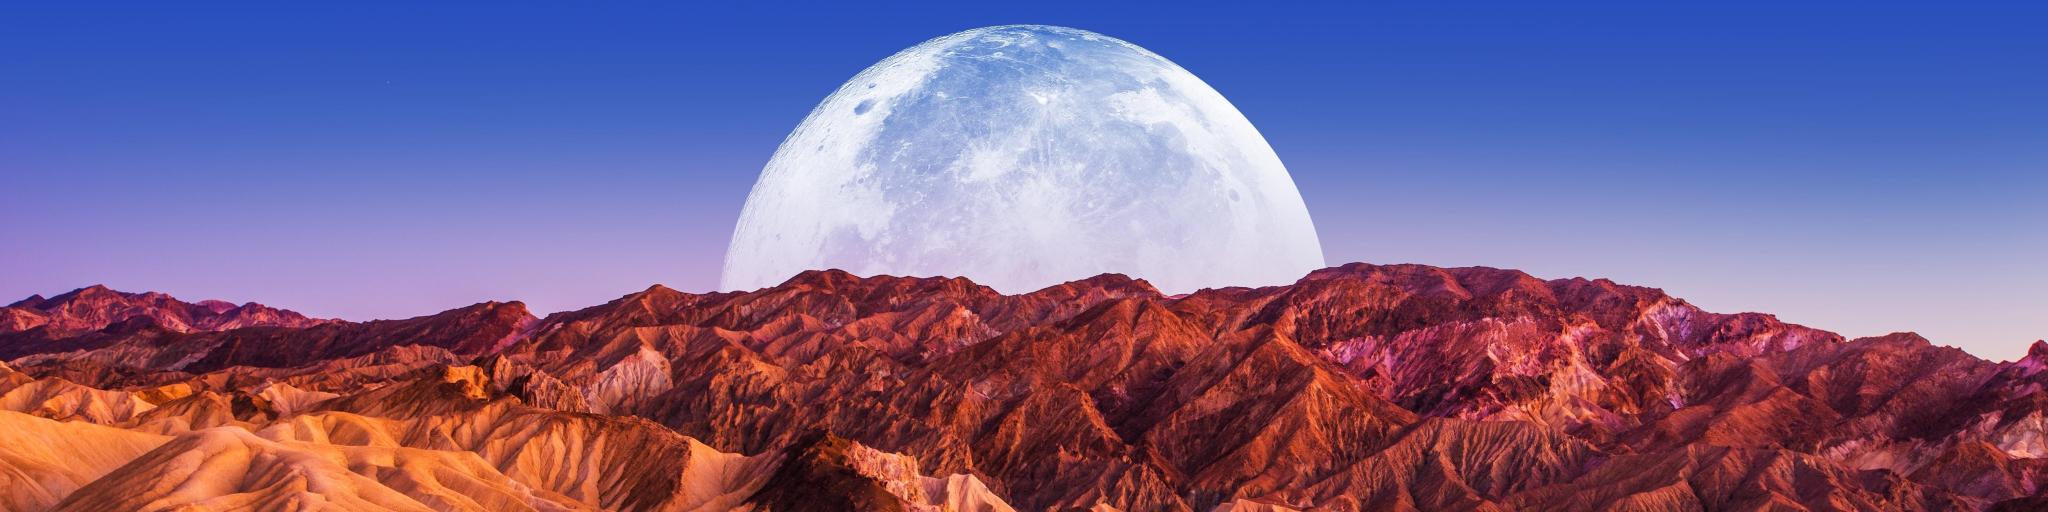 The moon rising over the rugged red rocks of Death Valley National Park